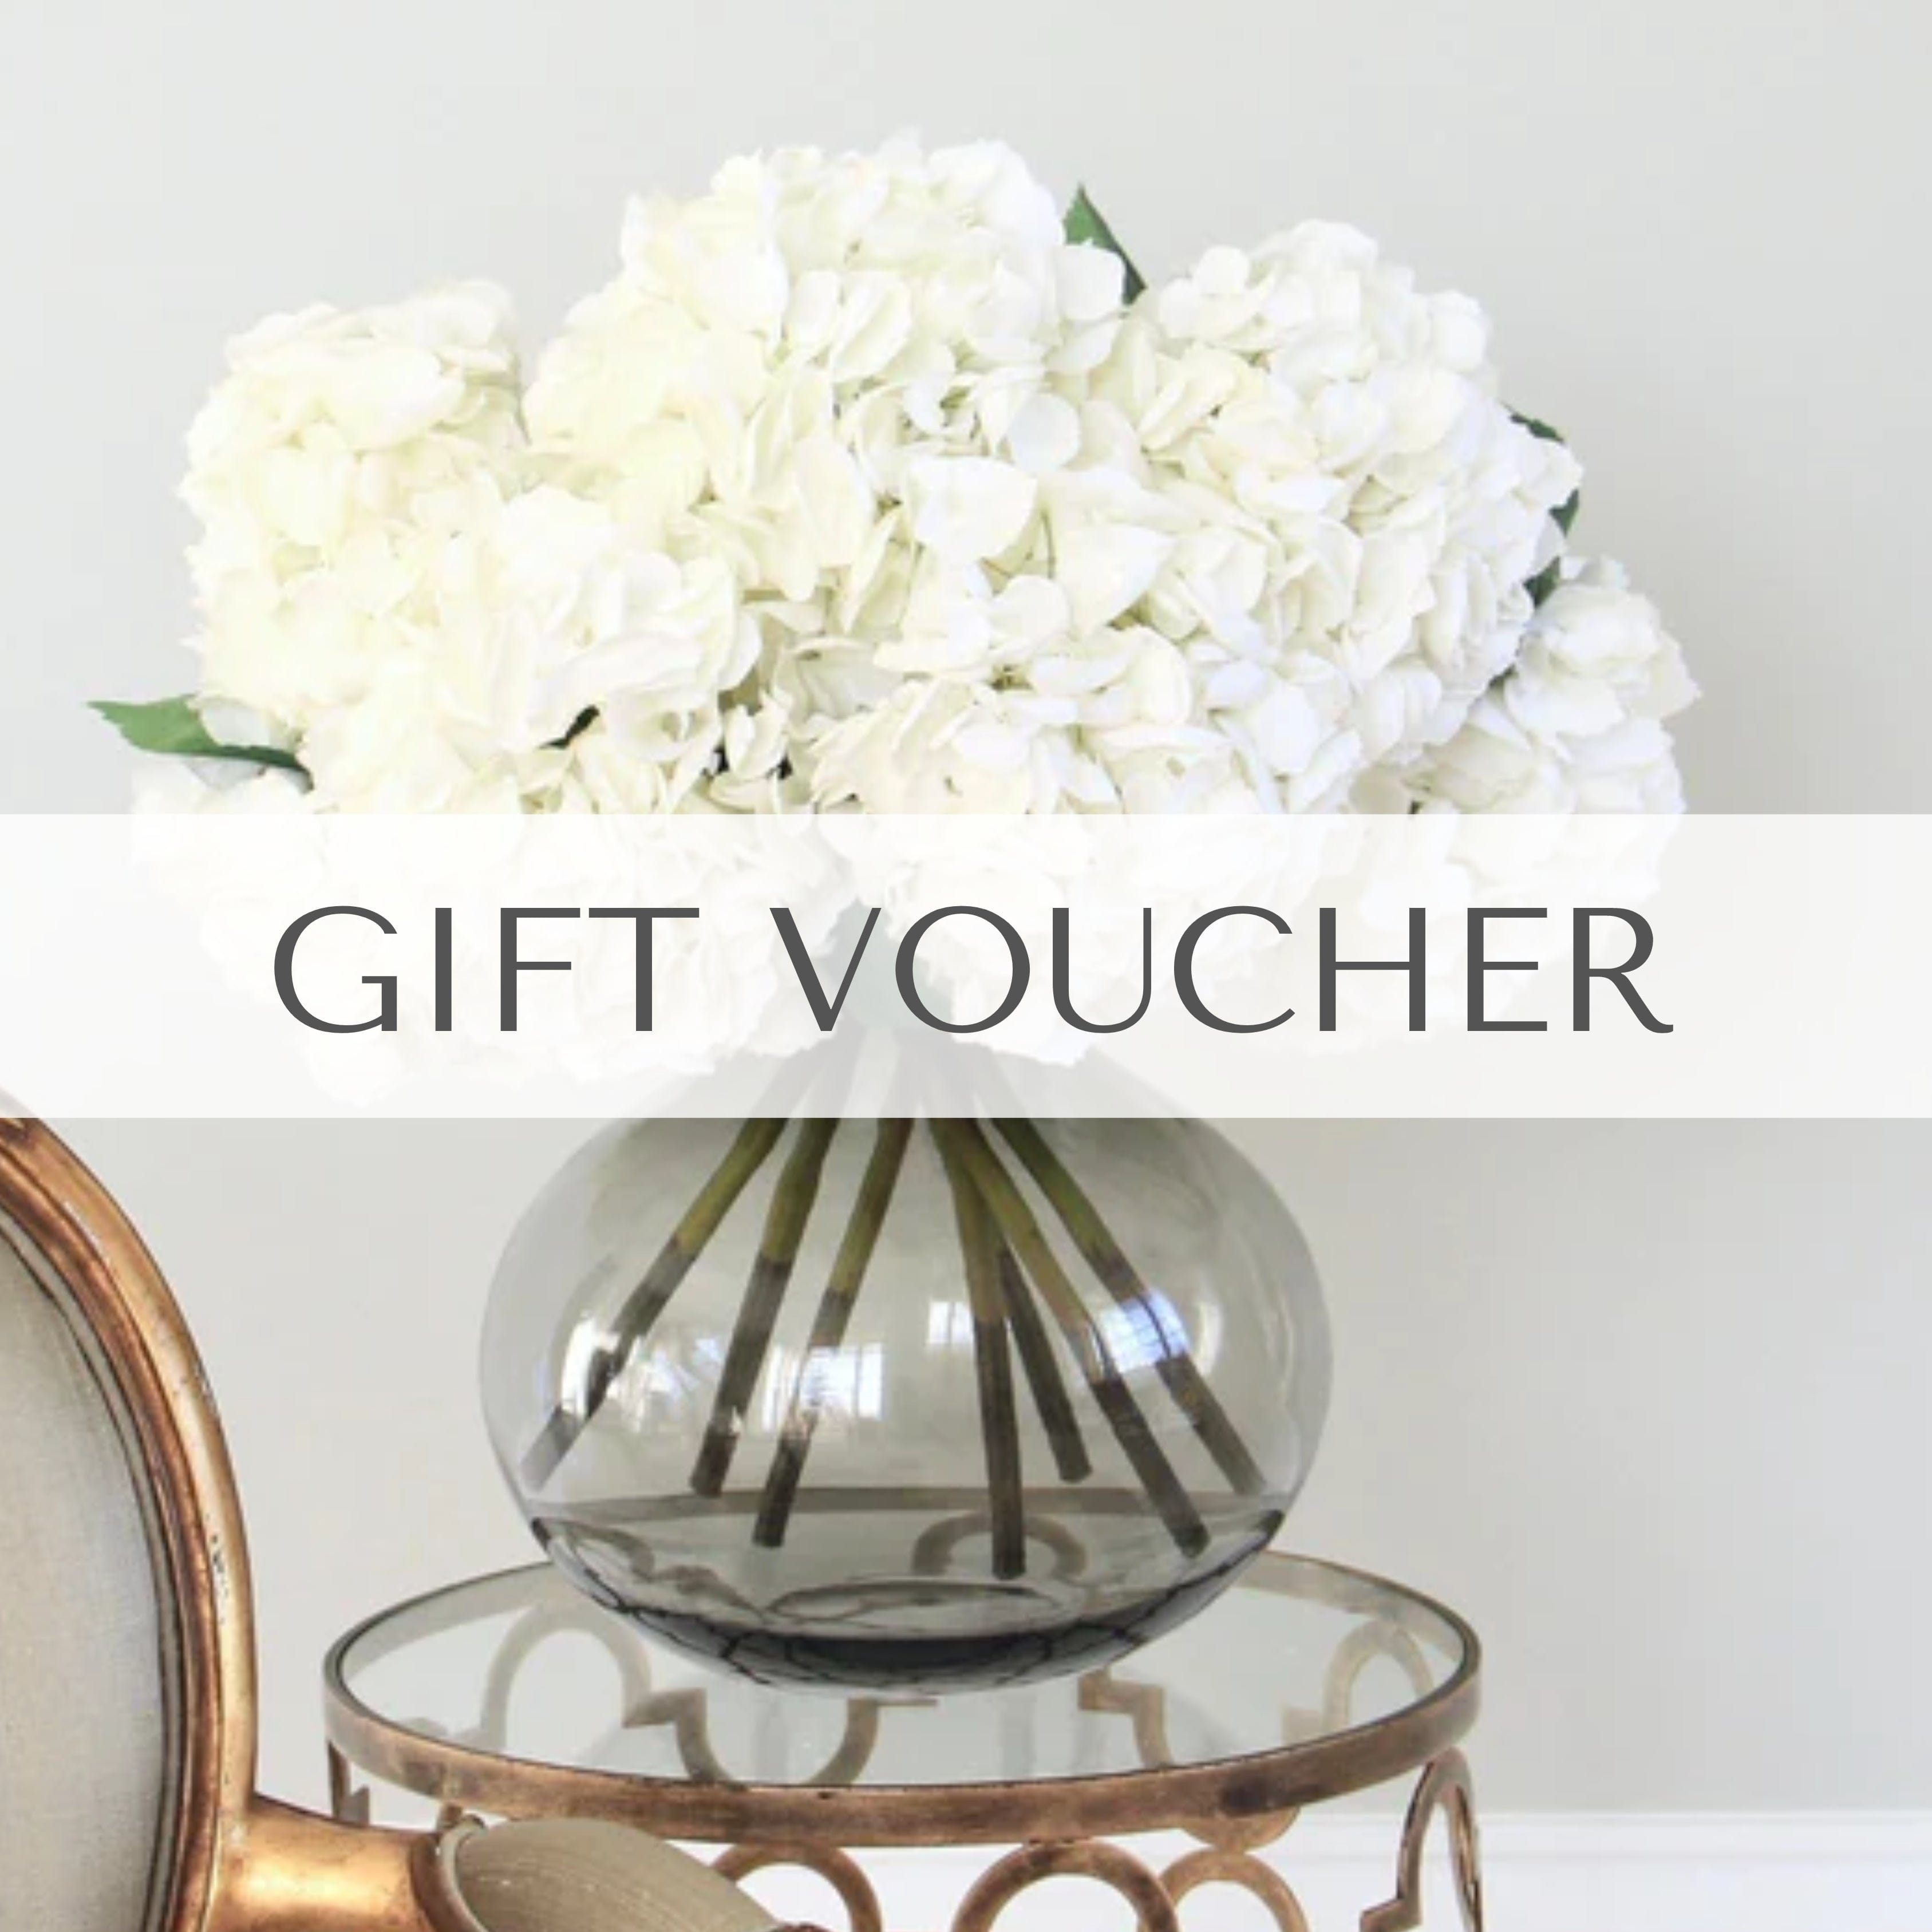 Gift voucher for the most realistic artificial flowers and plants The Faux Flower Company